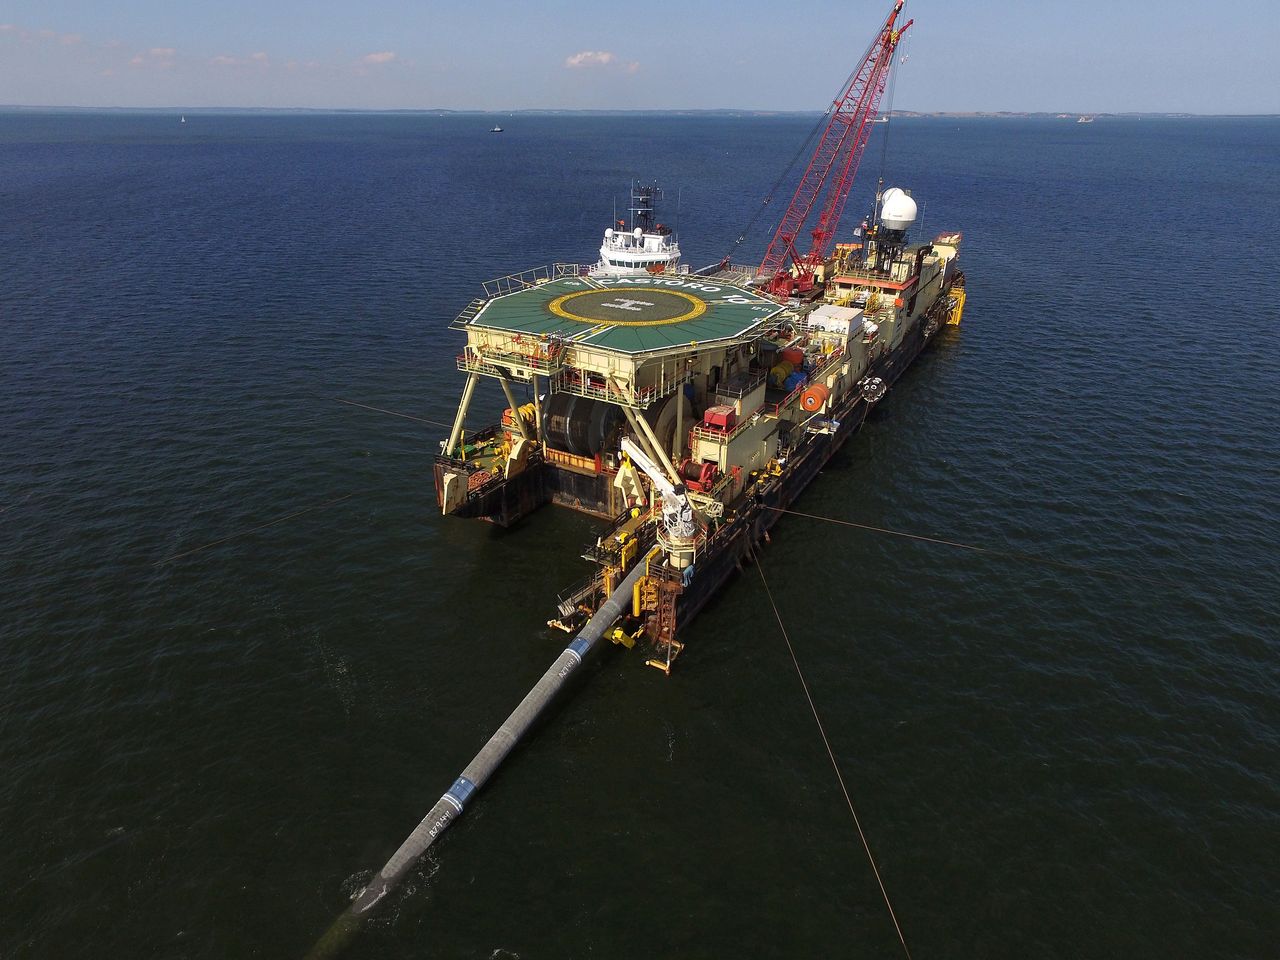 Laying the Nord Stream 2 gas pipeline on the bottom of the Baltic Sea, August 2018